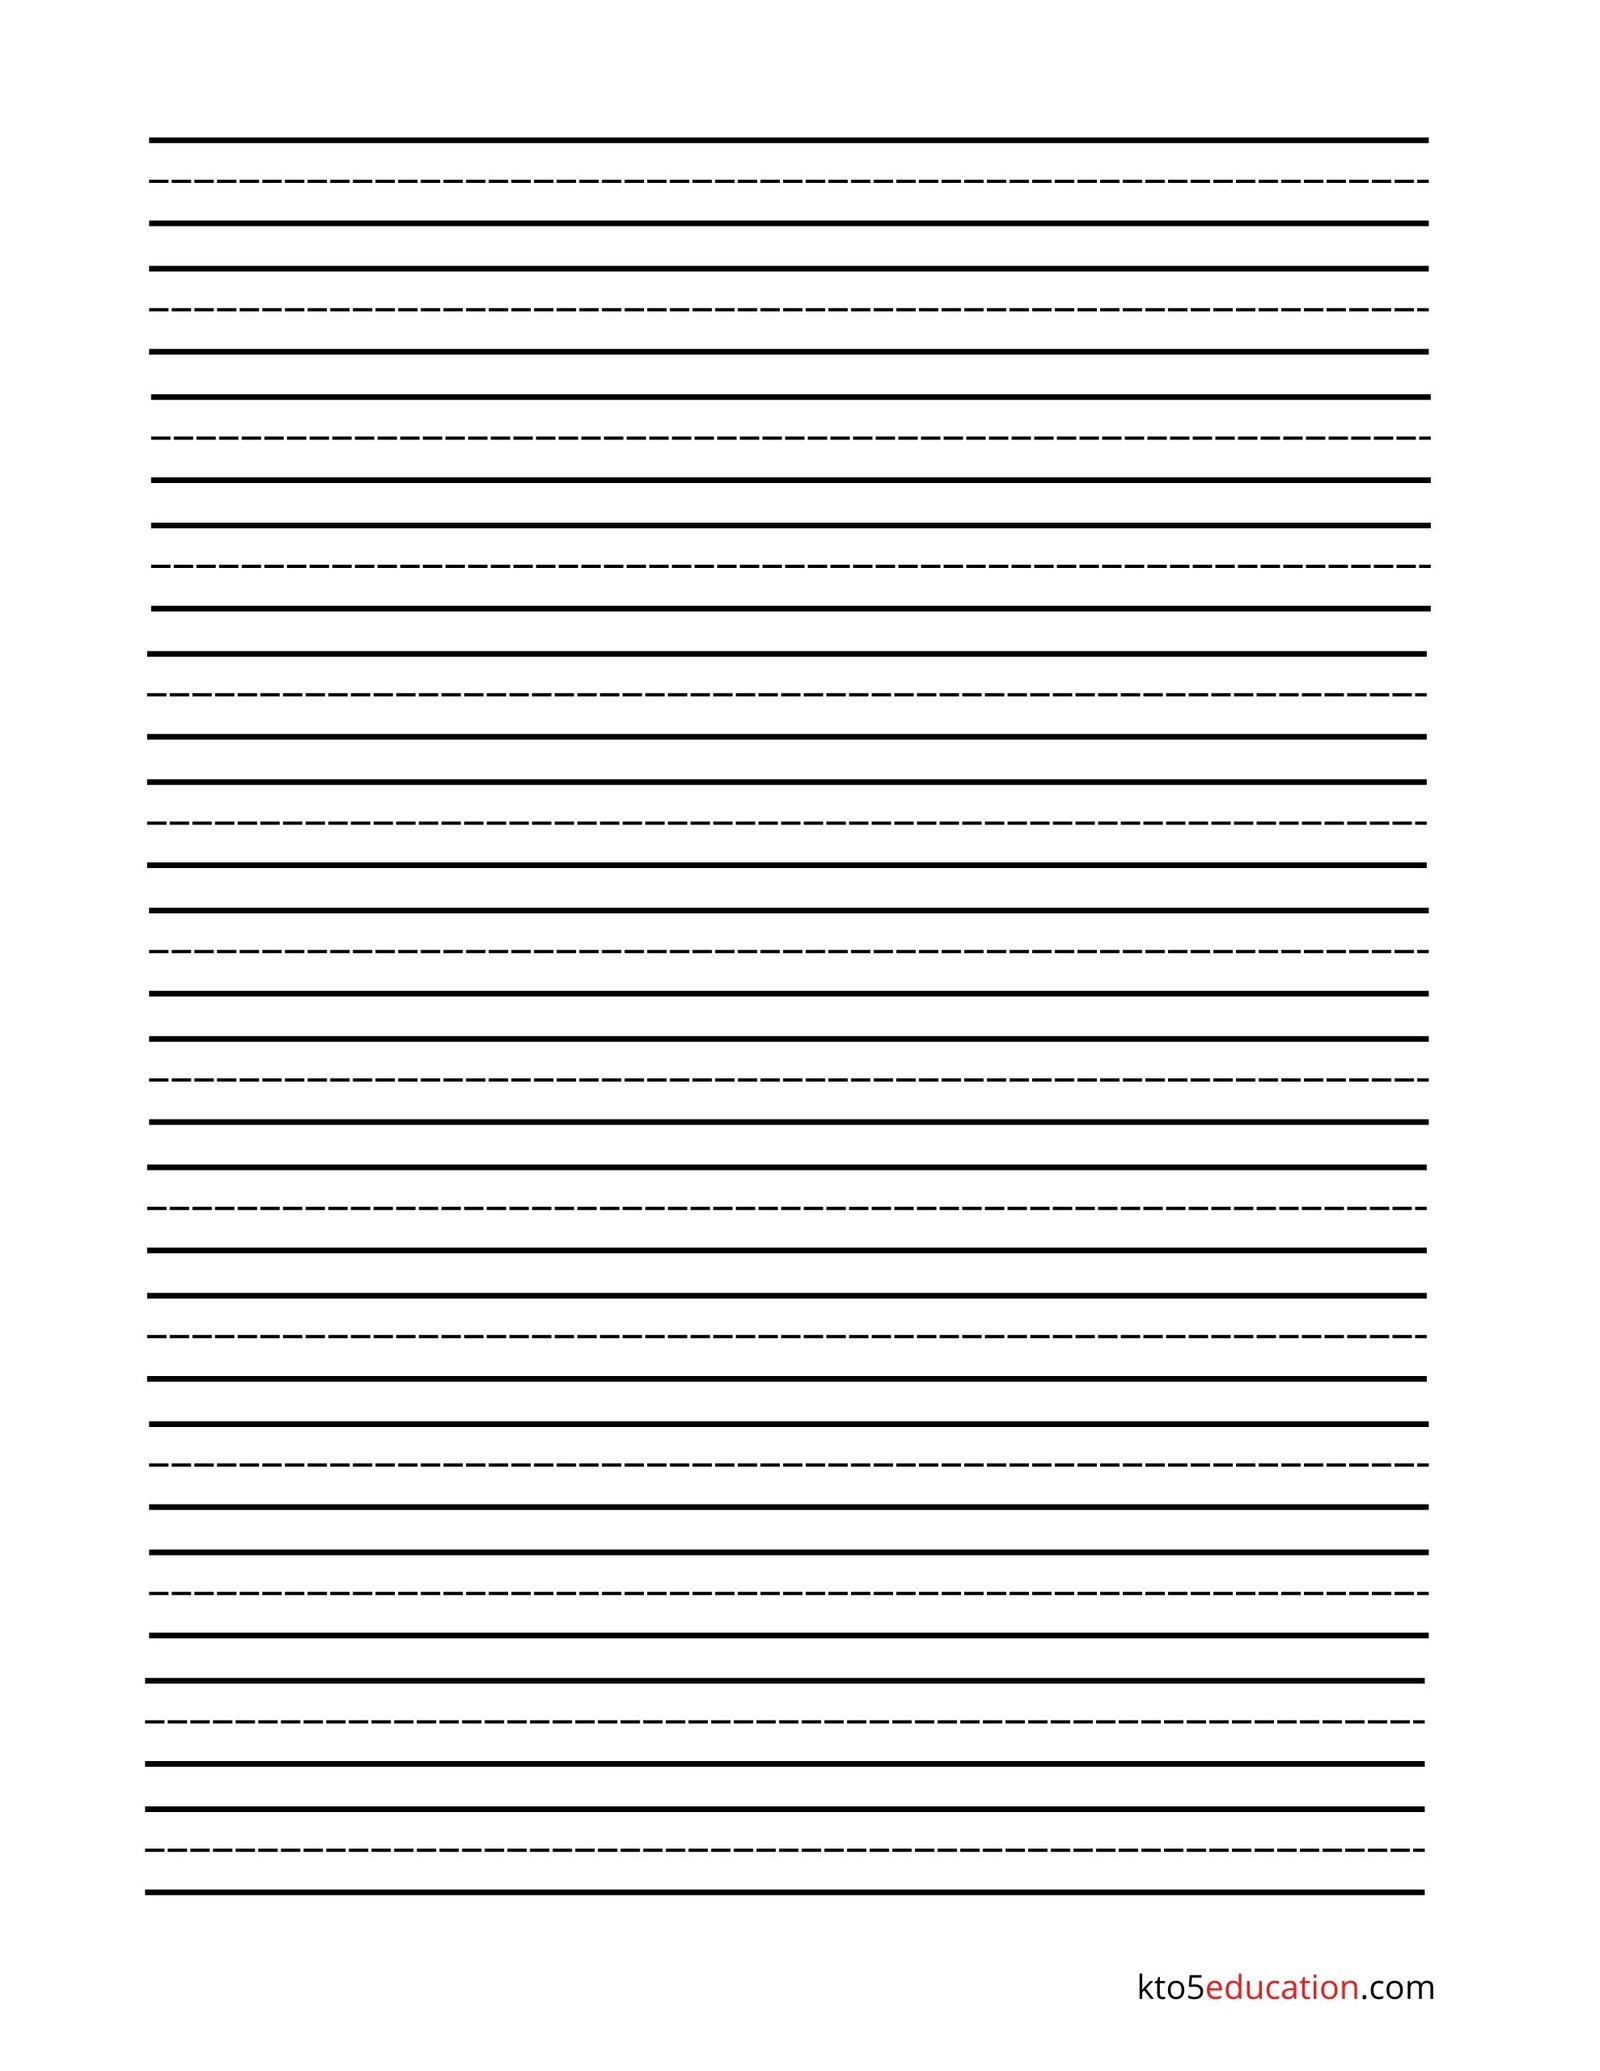 Paper With Lines For Handwriting